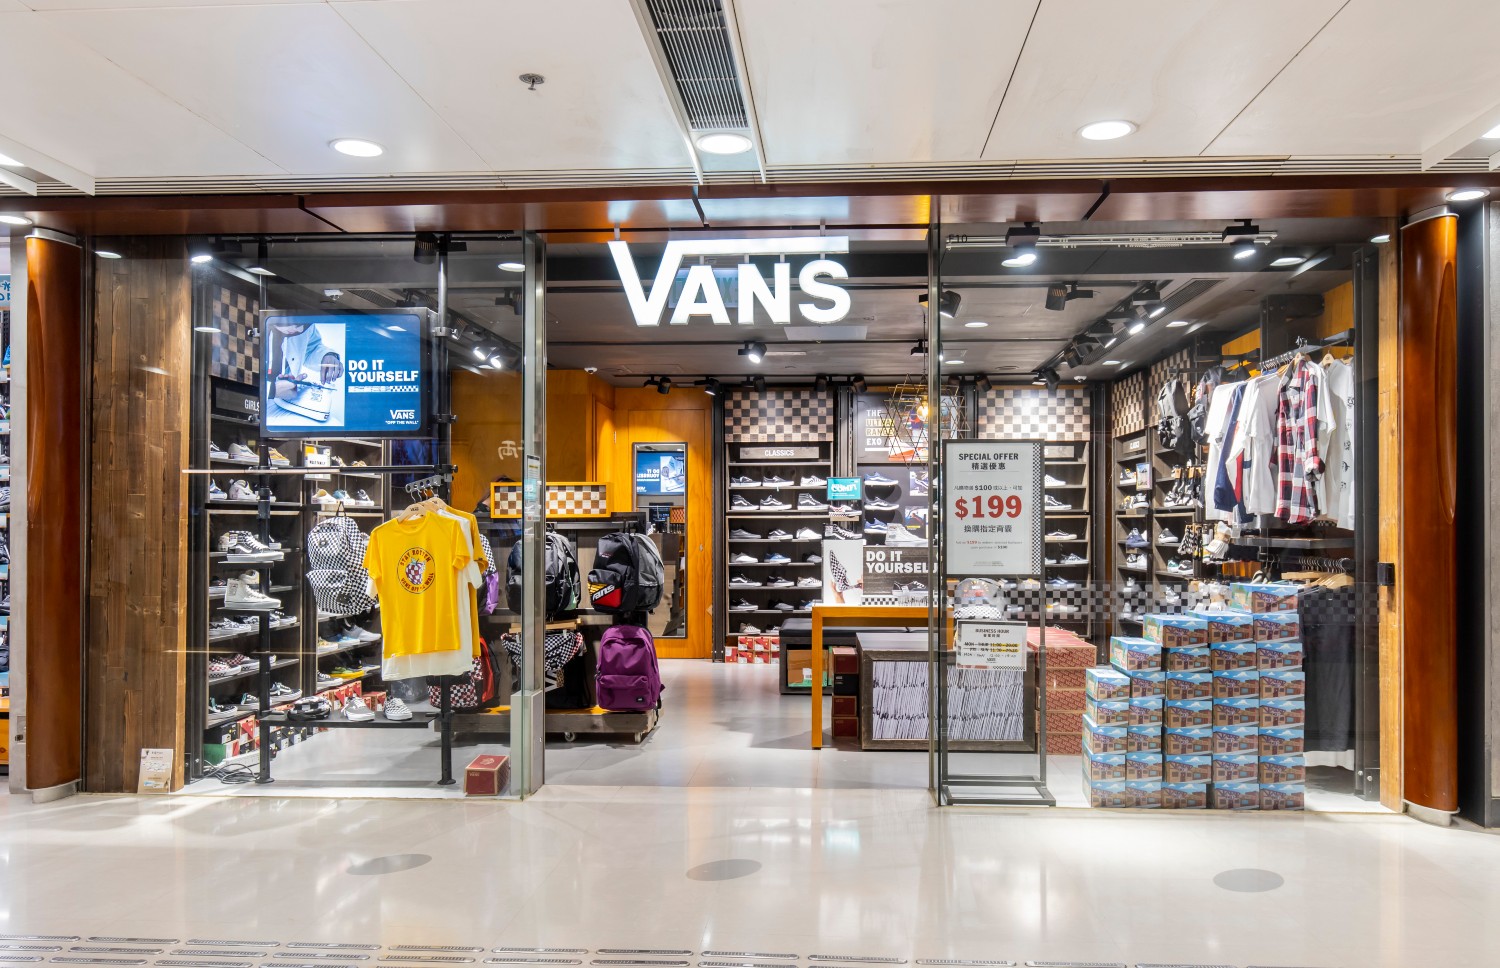 closest vans store to my location